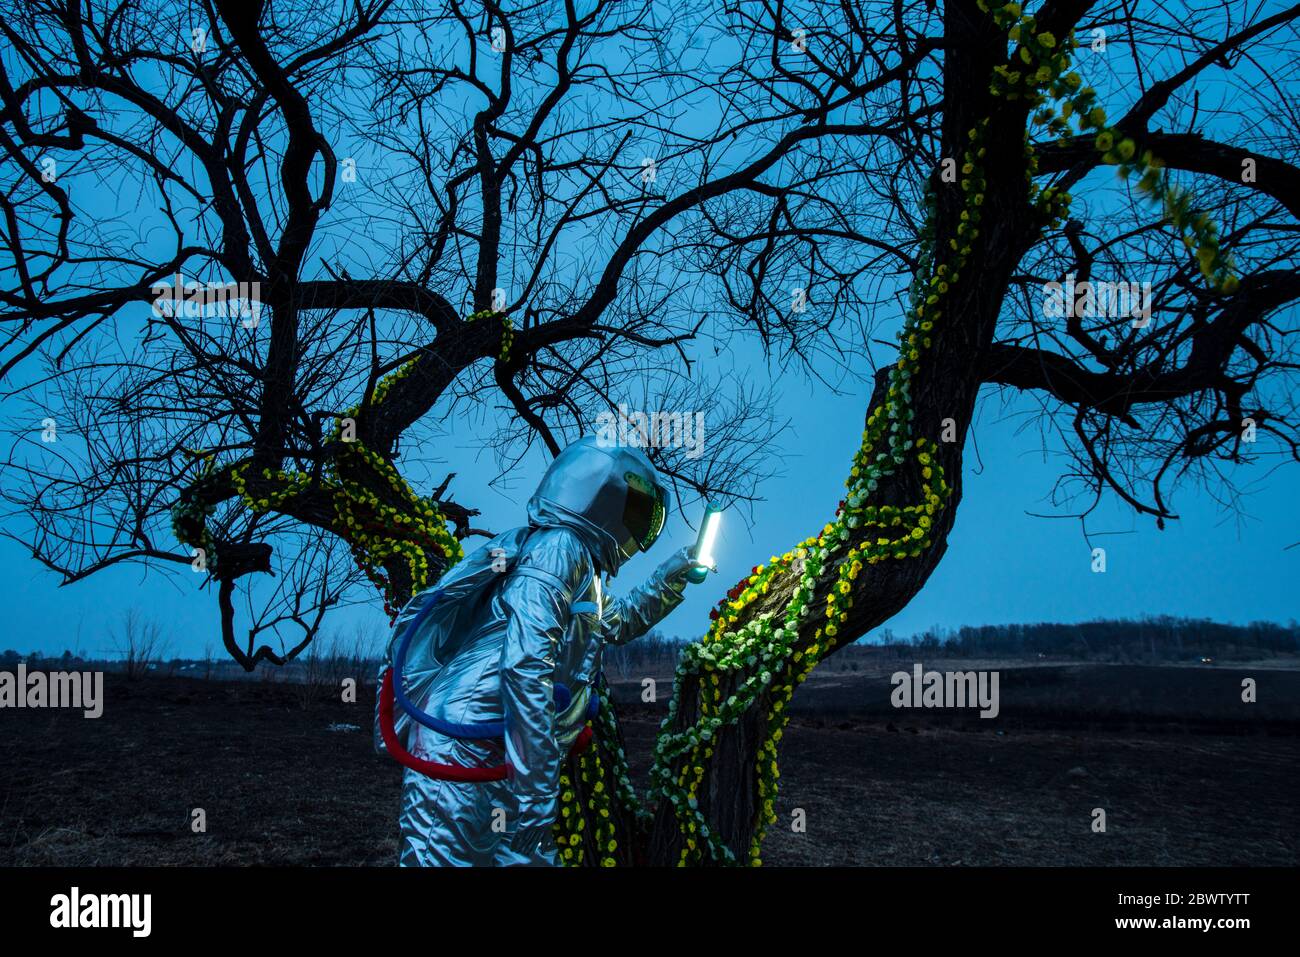 Spacewoman discovering a tree in the evening Stock Photo